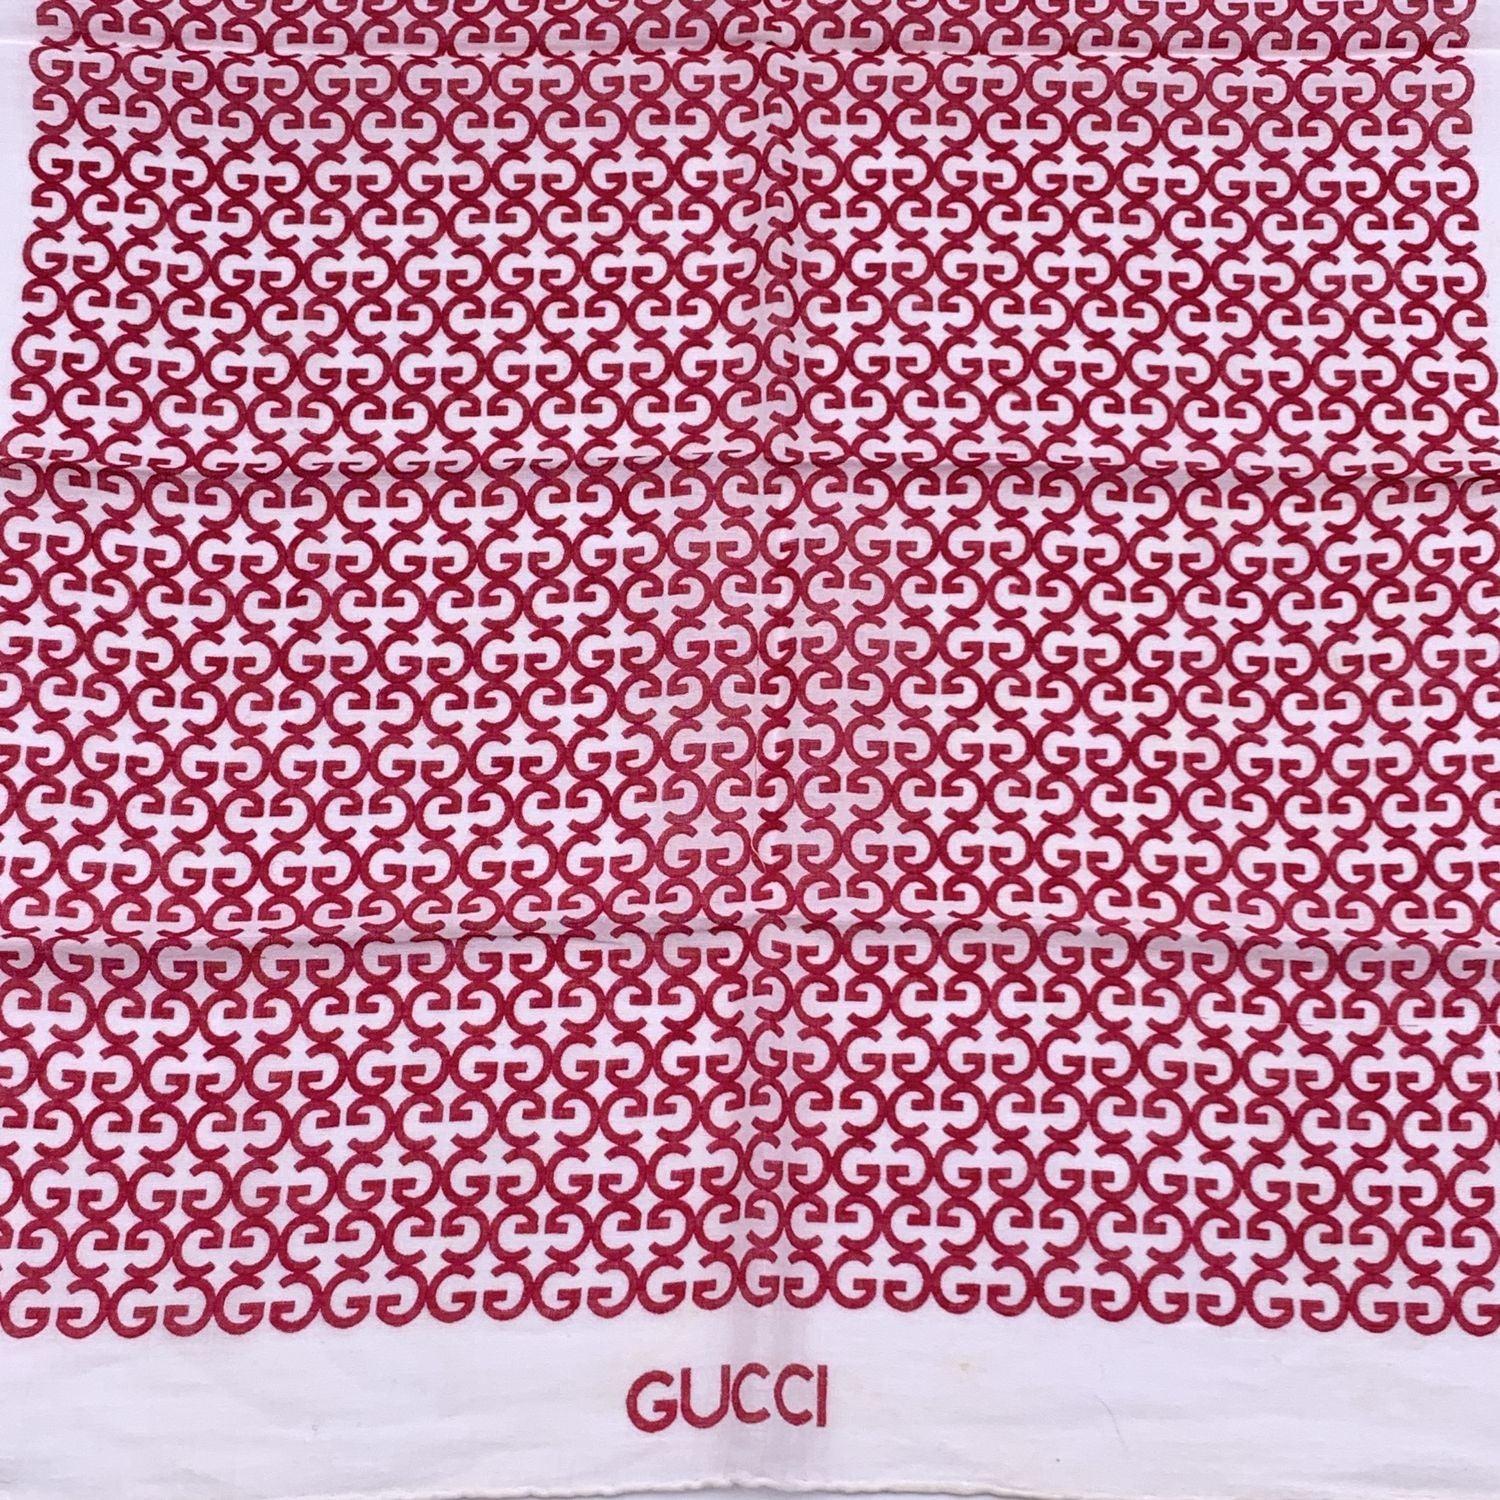 Vintage neck scarf by GUCCI. 100% Cotton. Magenta GG logo pattern with white borders. 'Gucci' signature printed on the lower center border. Approx. Measurements: 15 x 18 inches - 38.1 x 45.7cm Details MATERIAL: Cotton COLOR: Red MODEL: n.a. GENDER: